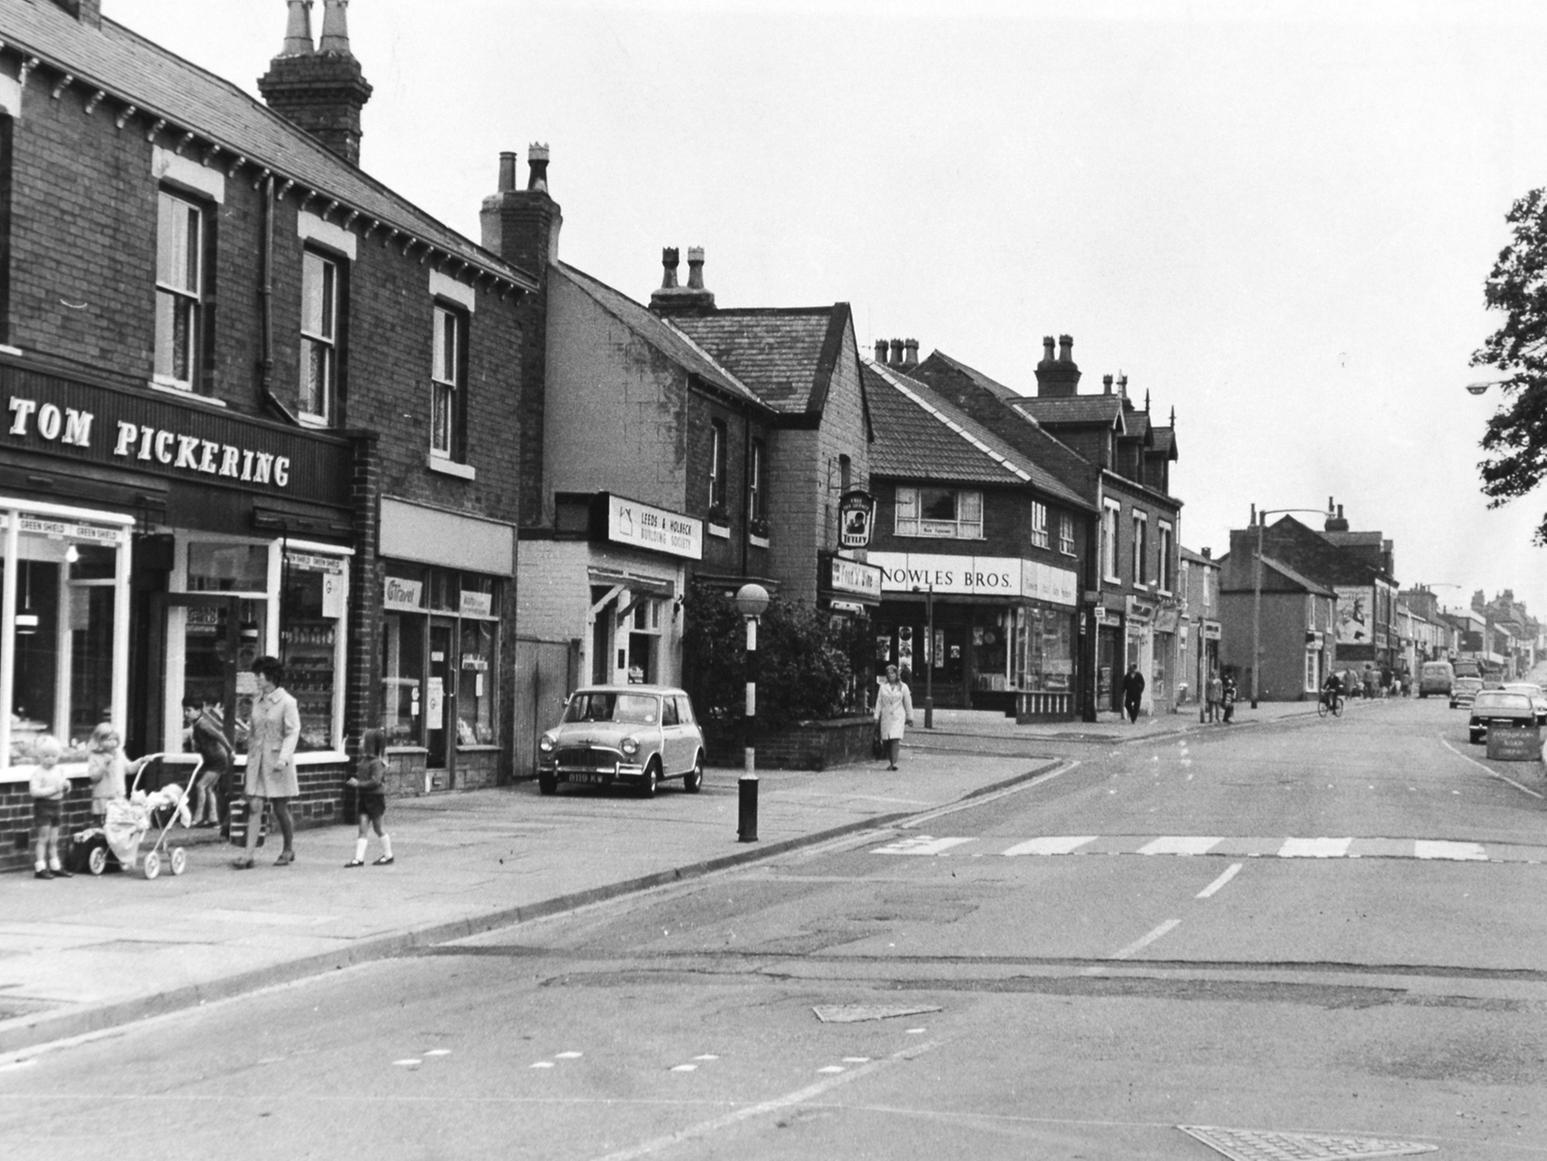 A view up Main Street in Garforth.